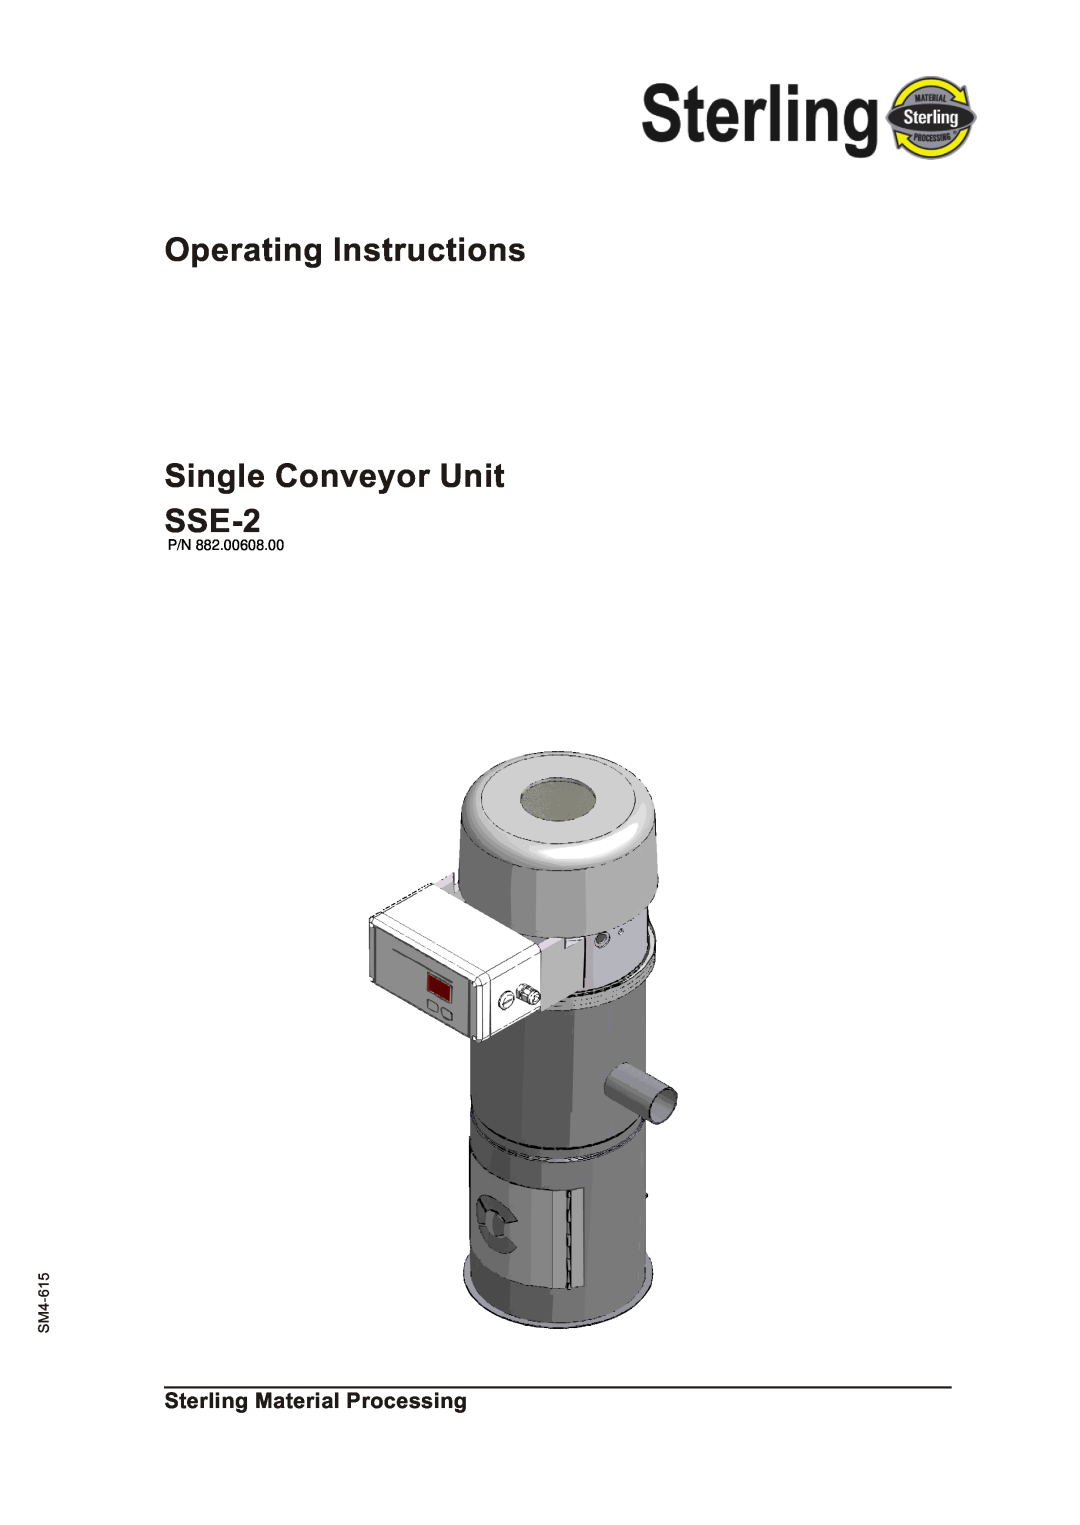 Sterling operating instructions Sterling Material Processing, Operating Instructions Single Conveyor Unit SSE-2 